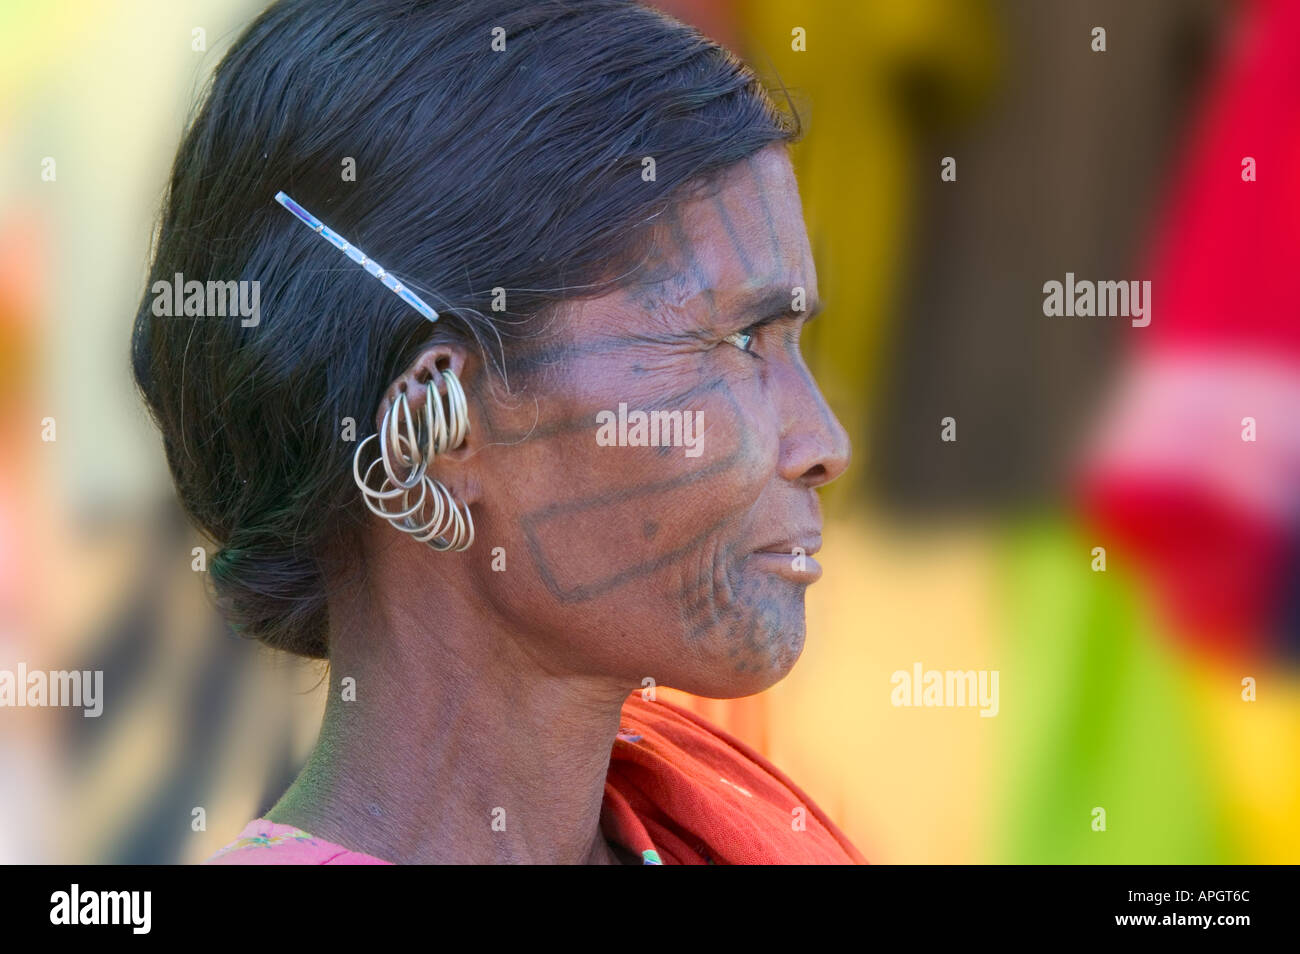 Group of women in traditional clothing carry heavy wood on head  Udhagamandalam Ootacamund Ooty Tamil Nadu India South Asia Stock Photo -  Alamy